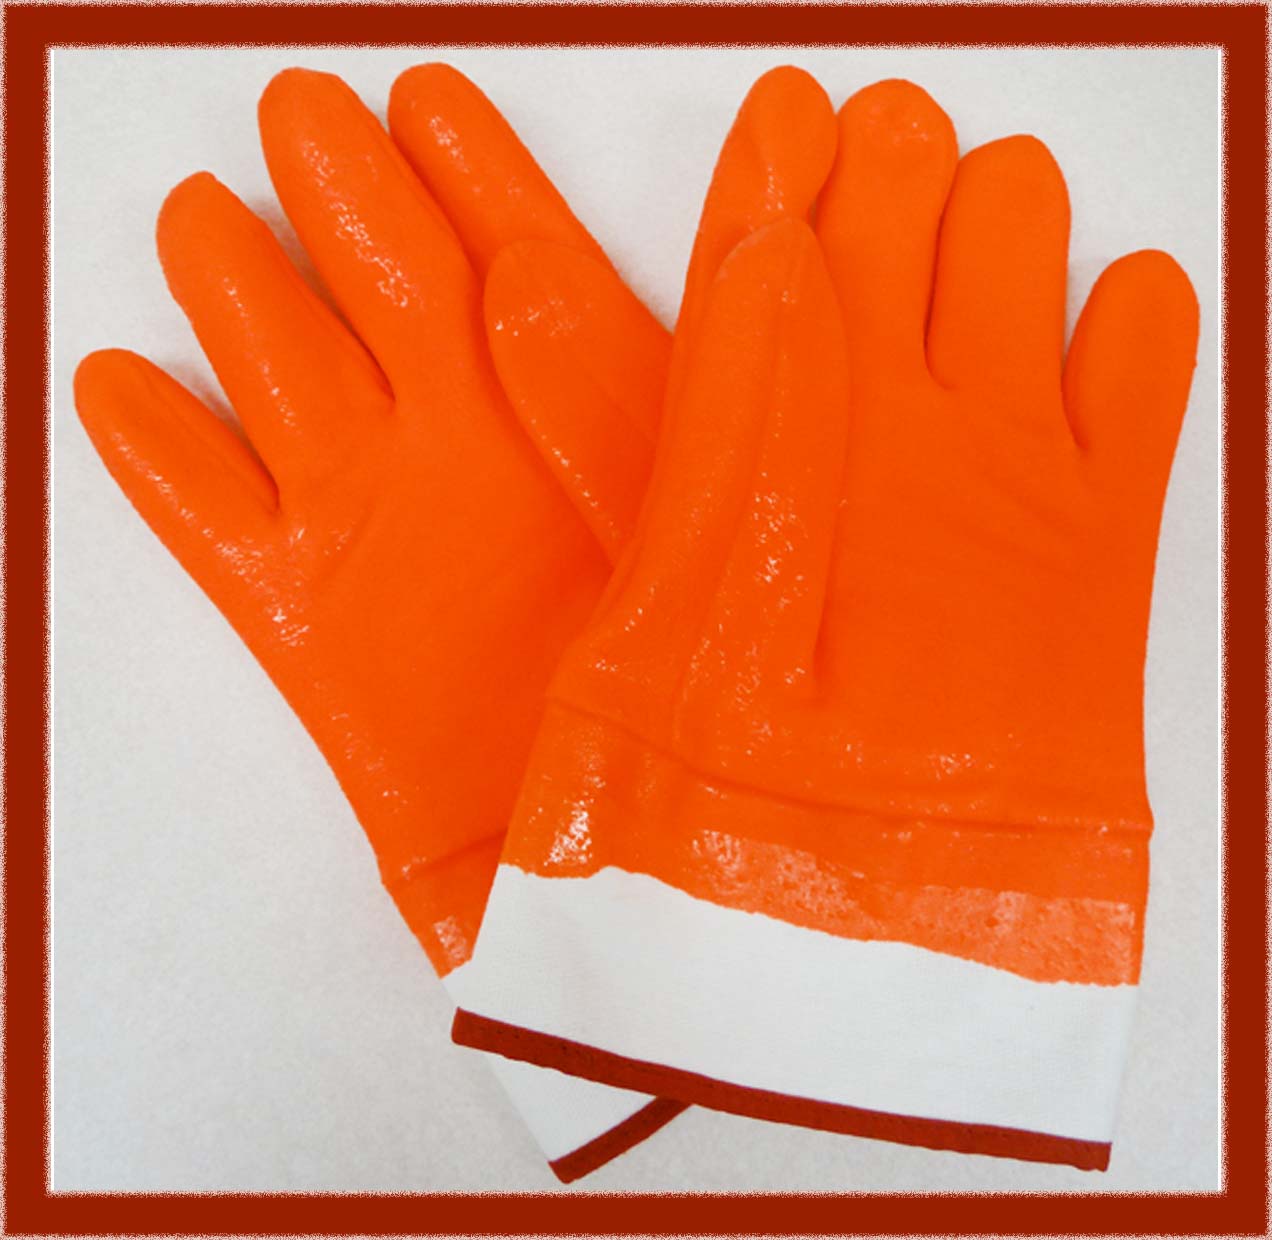 Product Highlight ~Gardening “Crab” Gloves - J.O. Spice Company Inc.